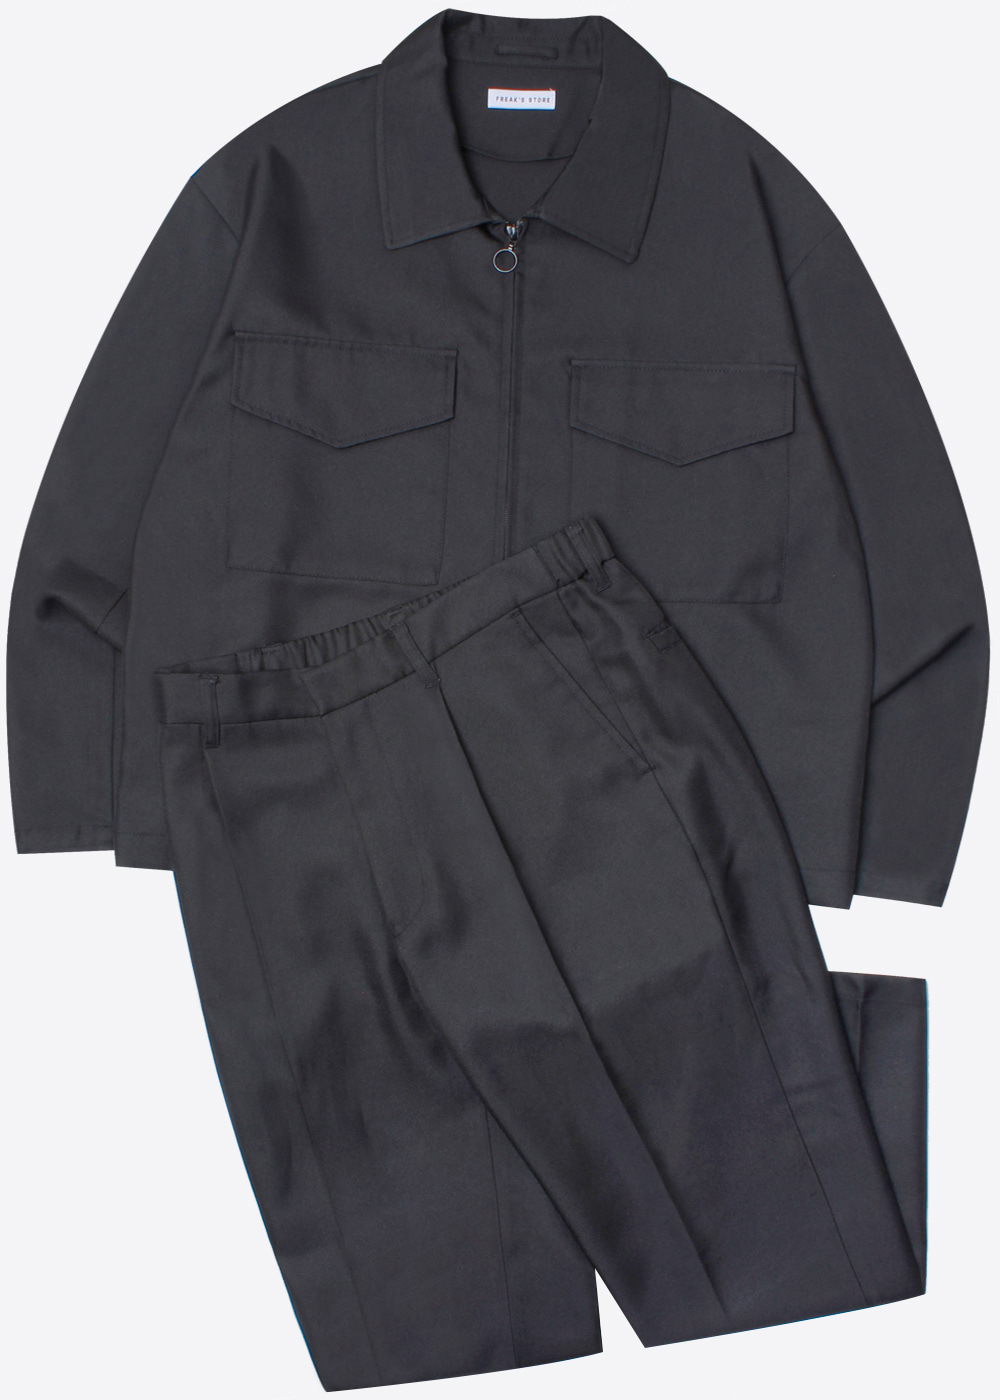 FREAK’S STORE’over fit’ nylon two-piece work jacket pant